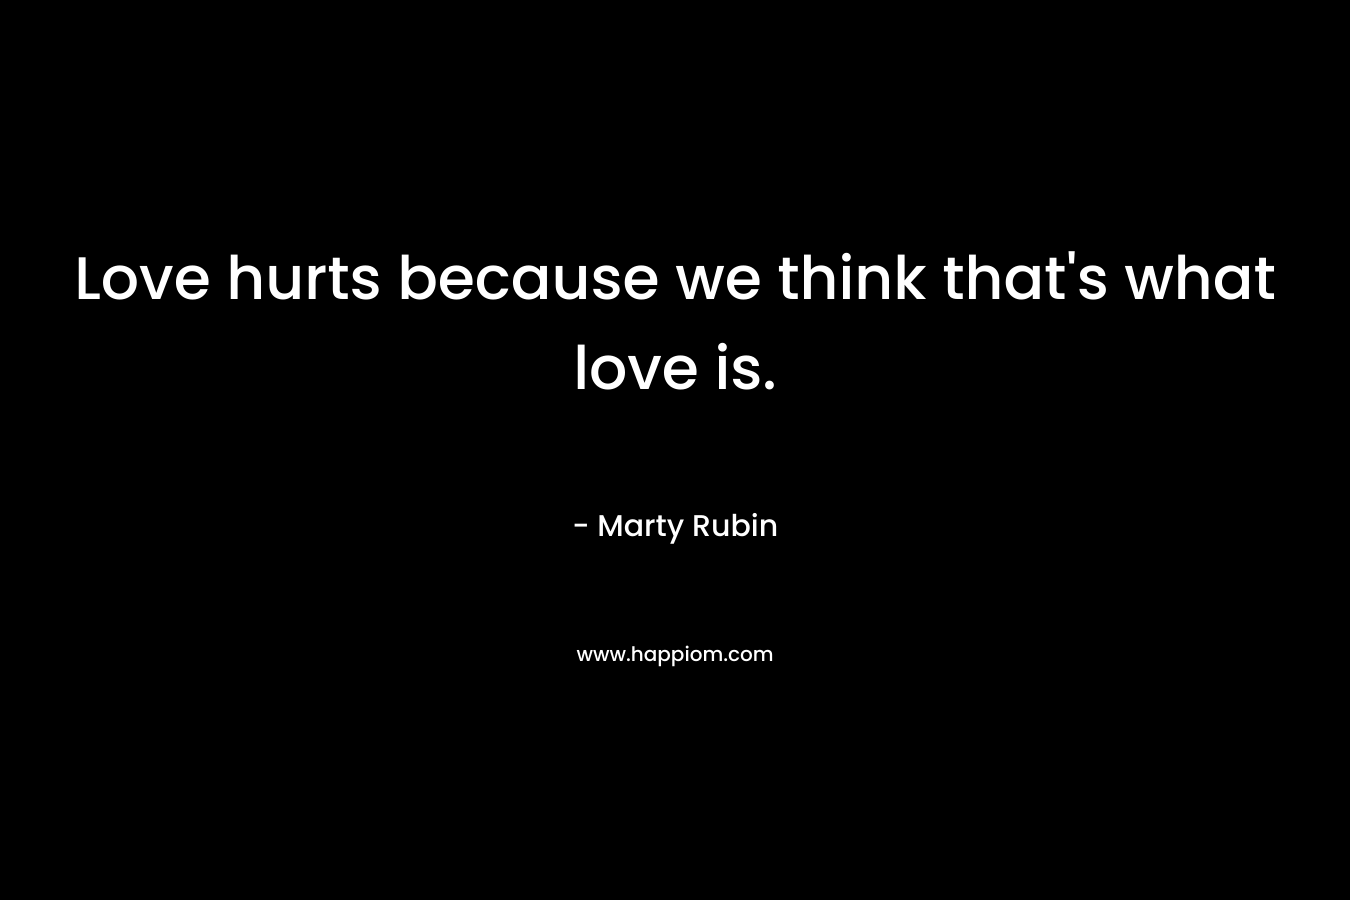 Love hurts because we think that's what love is.